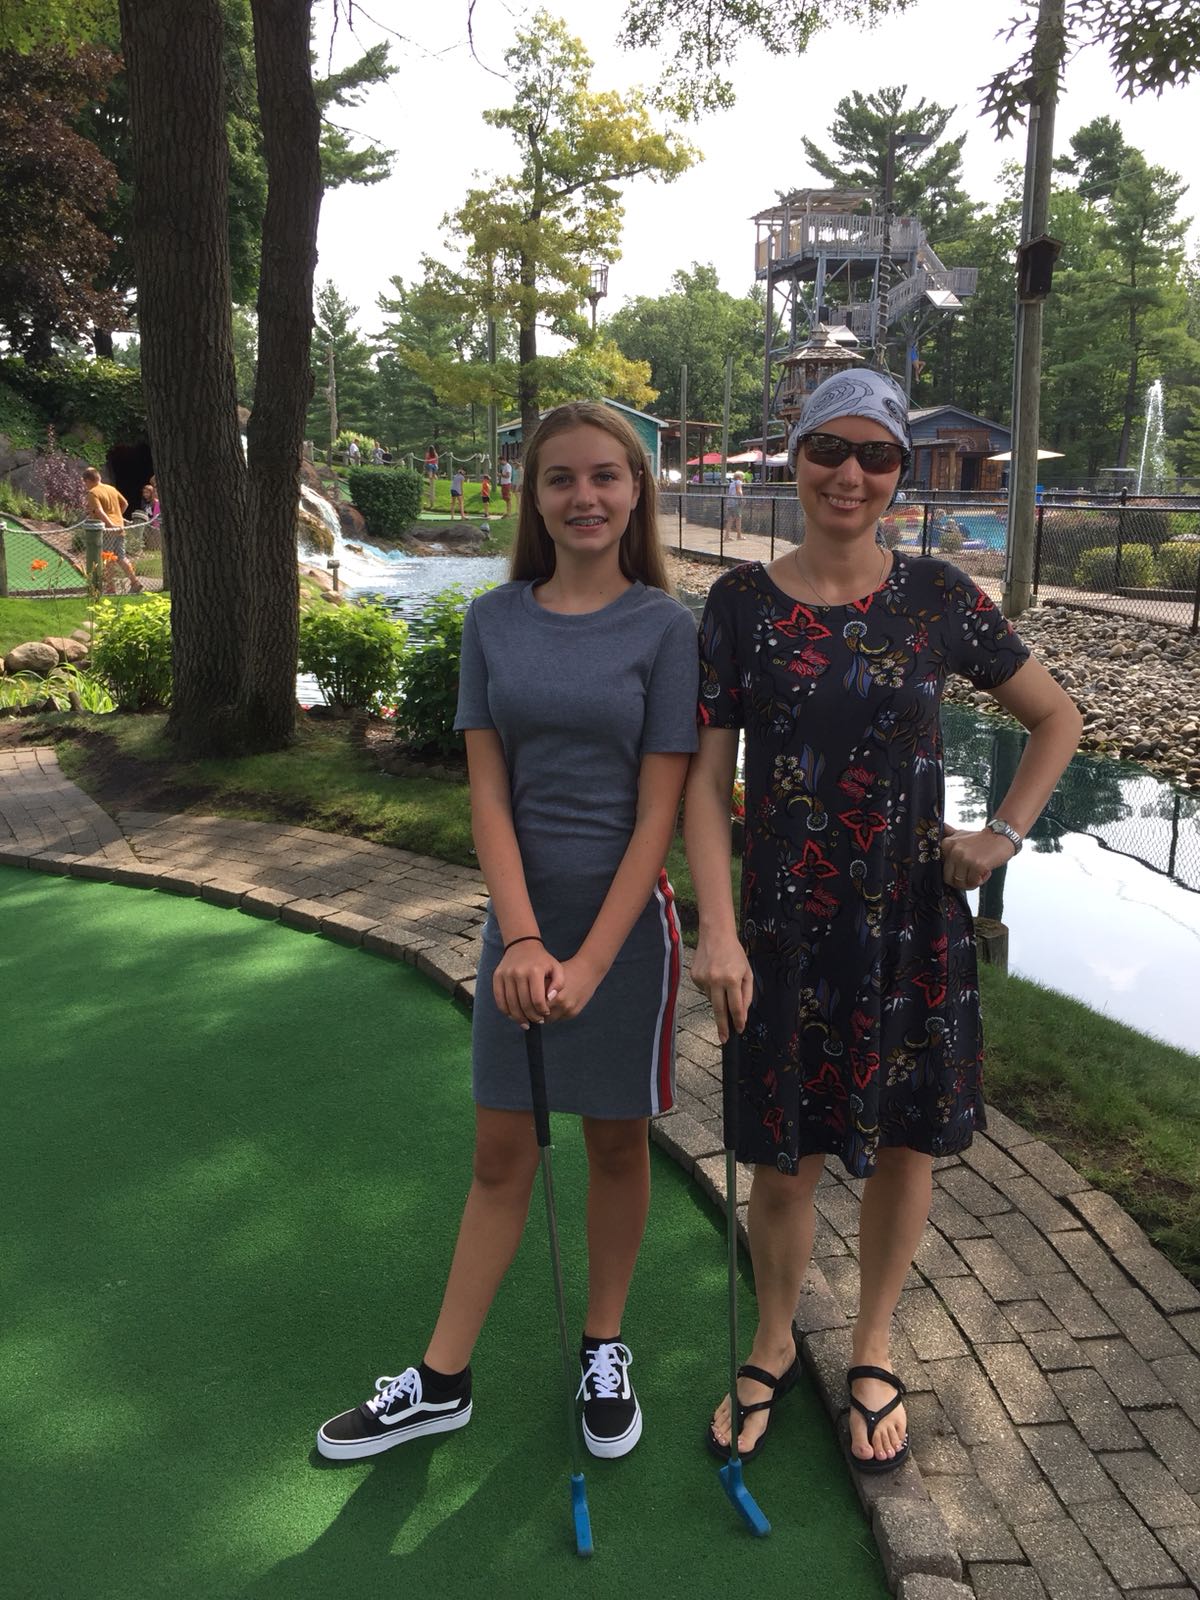 Elena and her daughter at the putting green